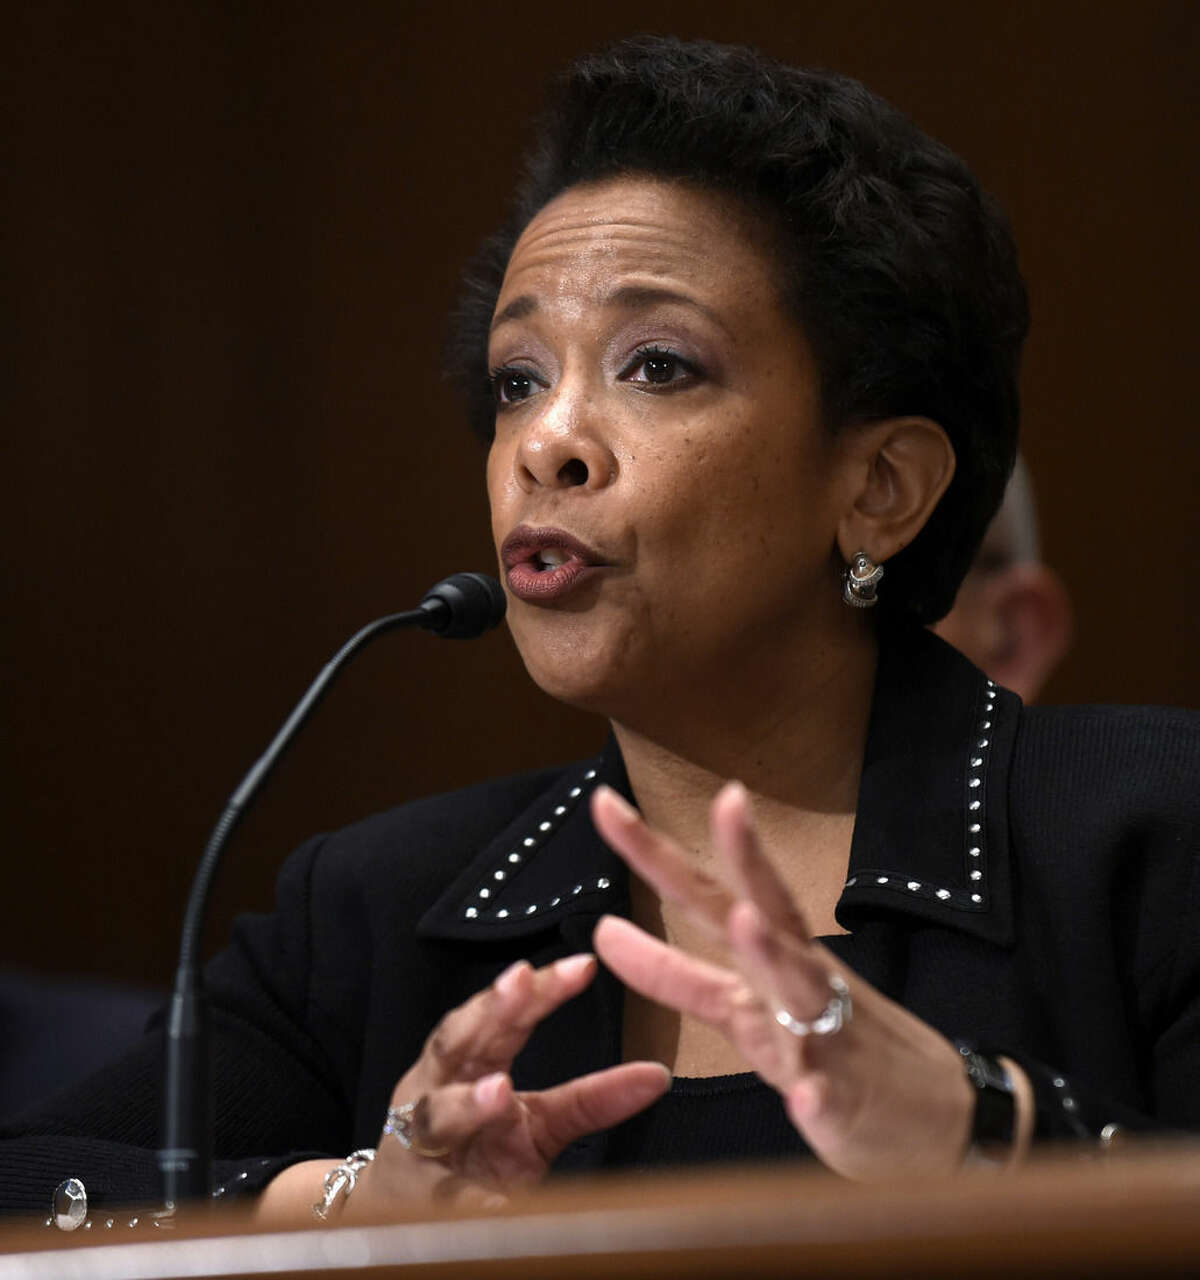 Attorney General Loretta Lynch testifies on Capitol Hill in Washington, Thursday, May 7, 2015, before the Senate subcommittee on Commerce, Justice, Science, and Related Agencies hearing to examine the proposed budget estimates for fiscal year 2016 for the Justice Department. Lynch said she’ll decide soon whether the Justice Department will undertake a civil rights investigation into the Baltimore police department. (AP Photo/Susan Walsh)